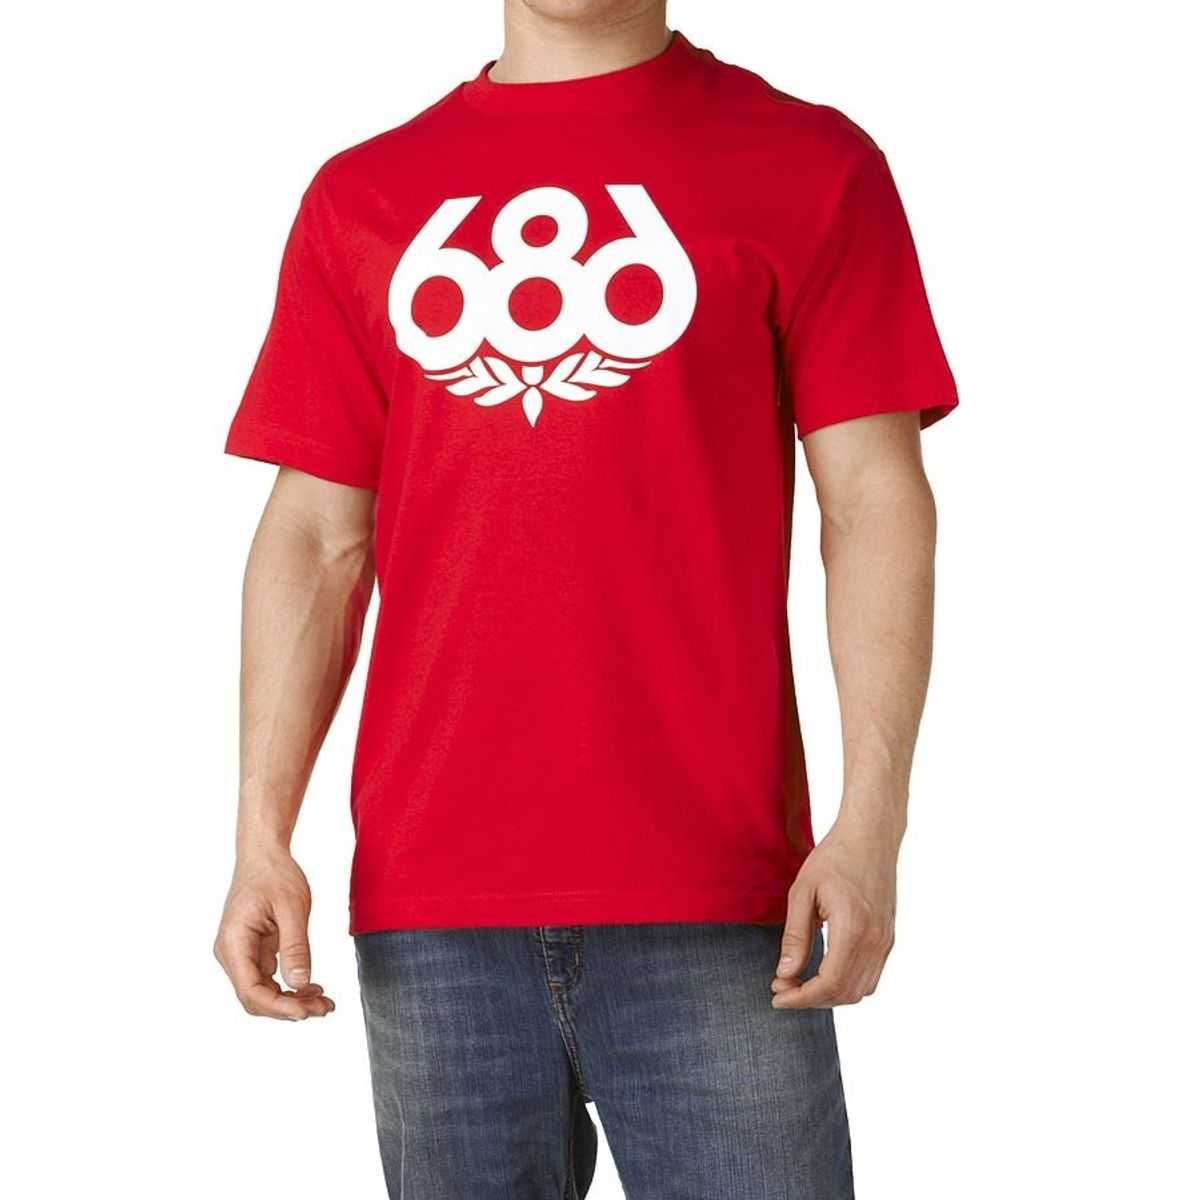 686 wreath red